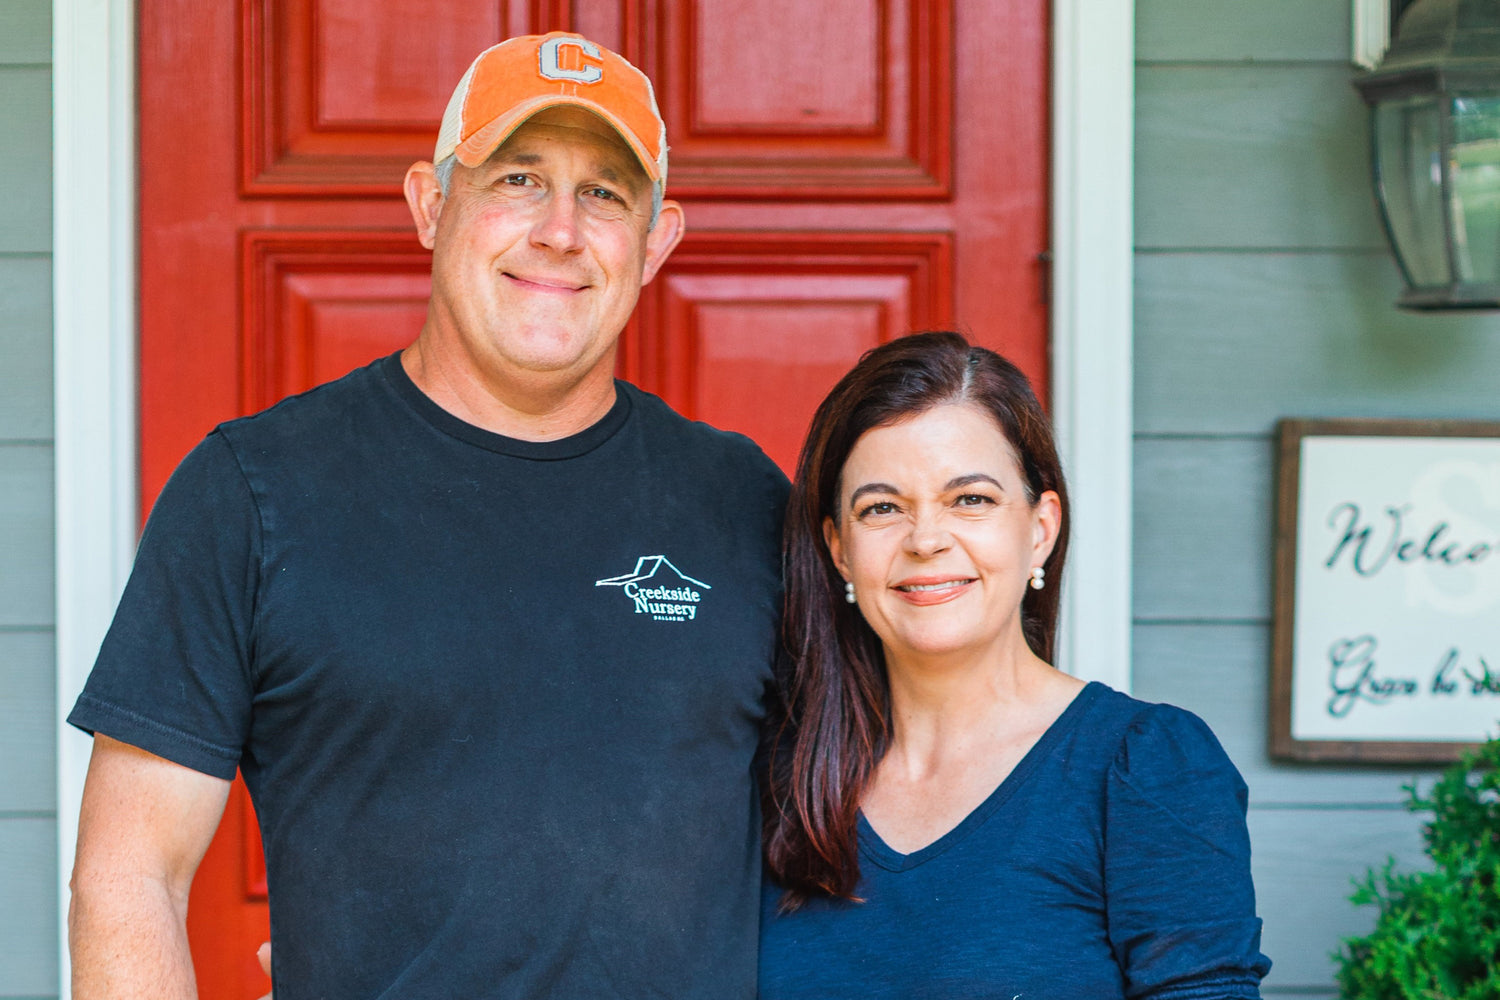 Owners of Creekside Nursery Jerry and Jenny Simpson standing together in front of red door